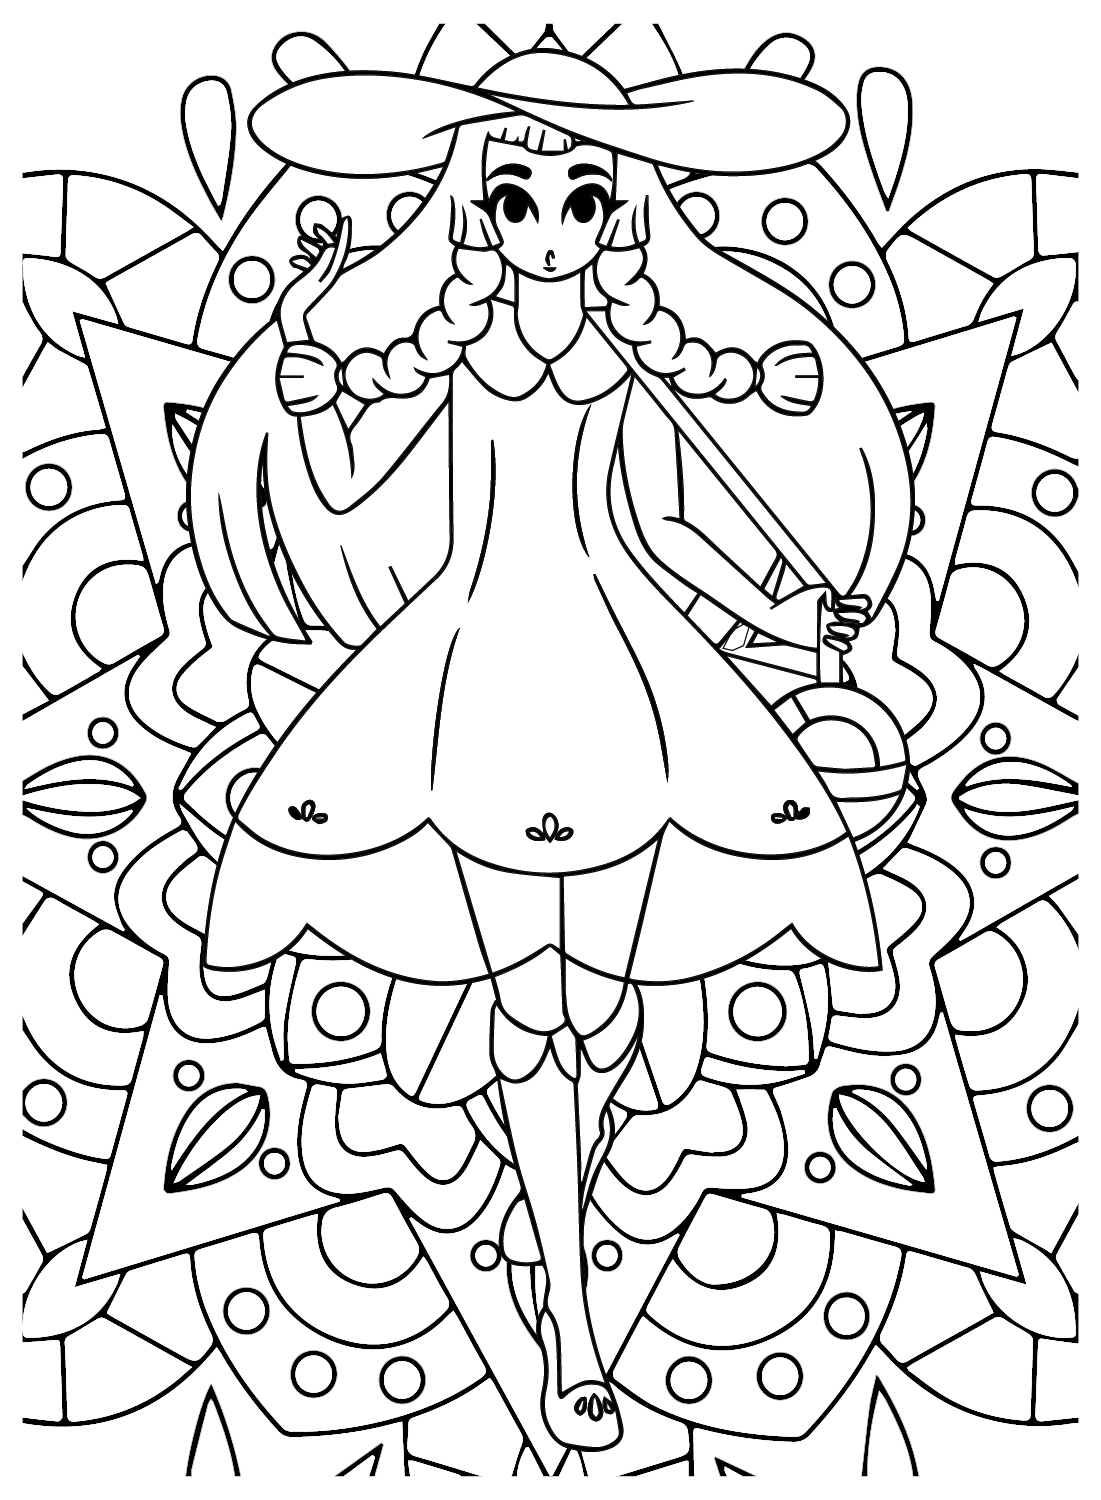 Lillie Pokemon Coloring Pages Free from Lillie Pokemon